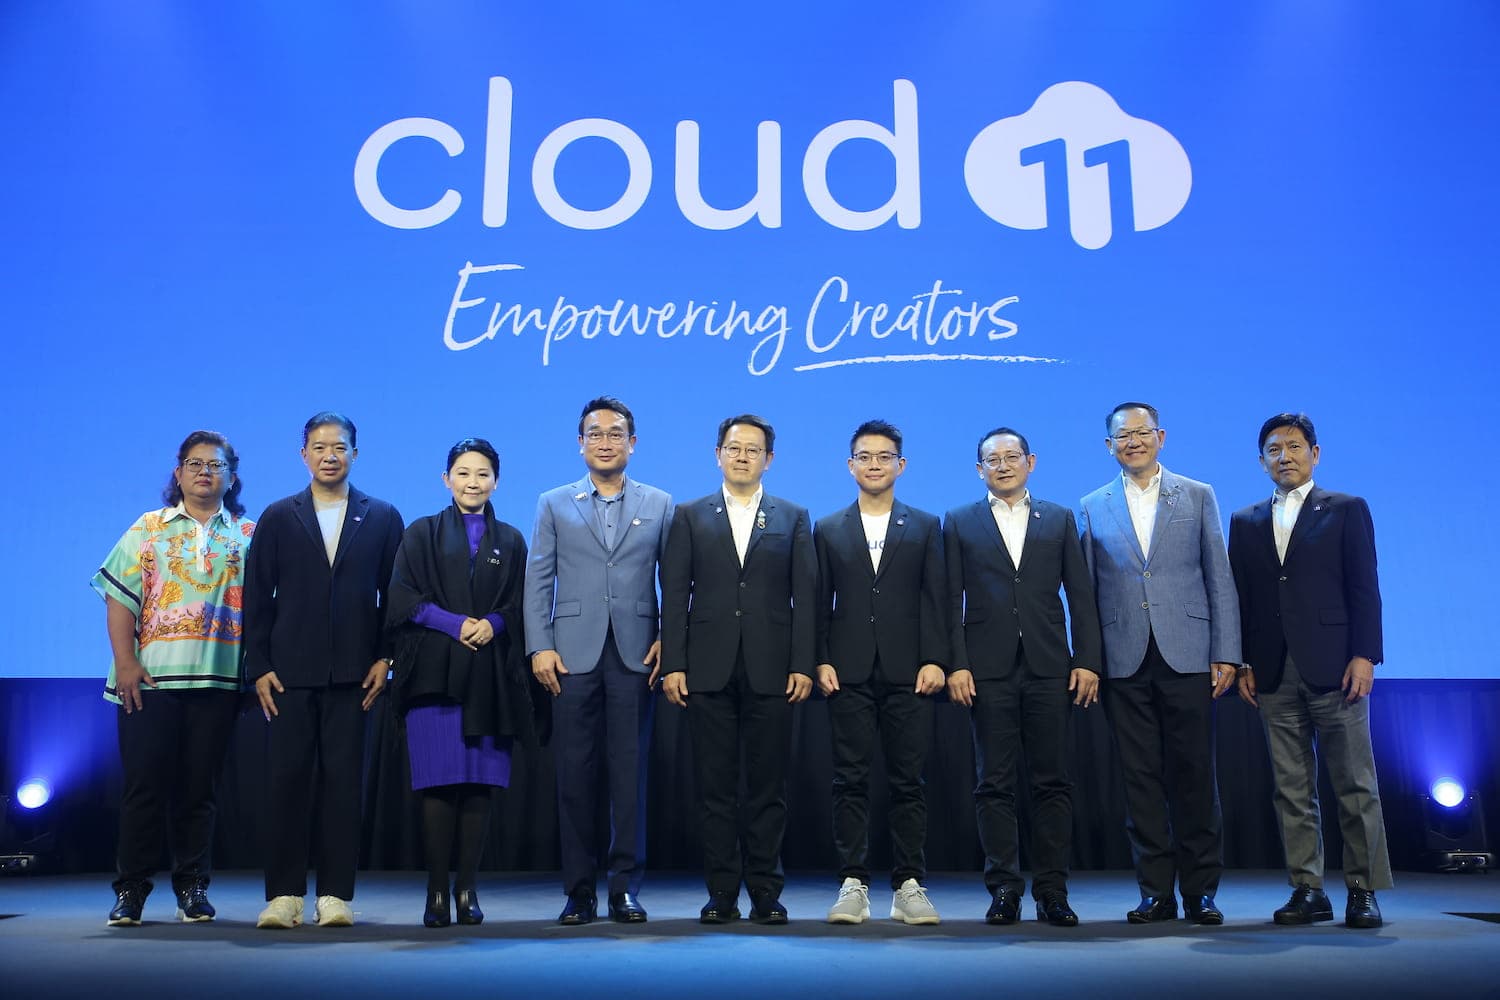 MQDC Unveils Cloud 11  as Asia’s Largest Hub for Content Creators with “Empowering Creators” Concept